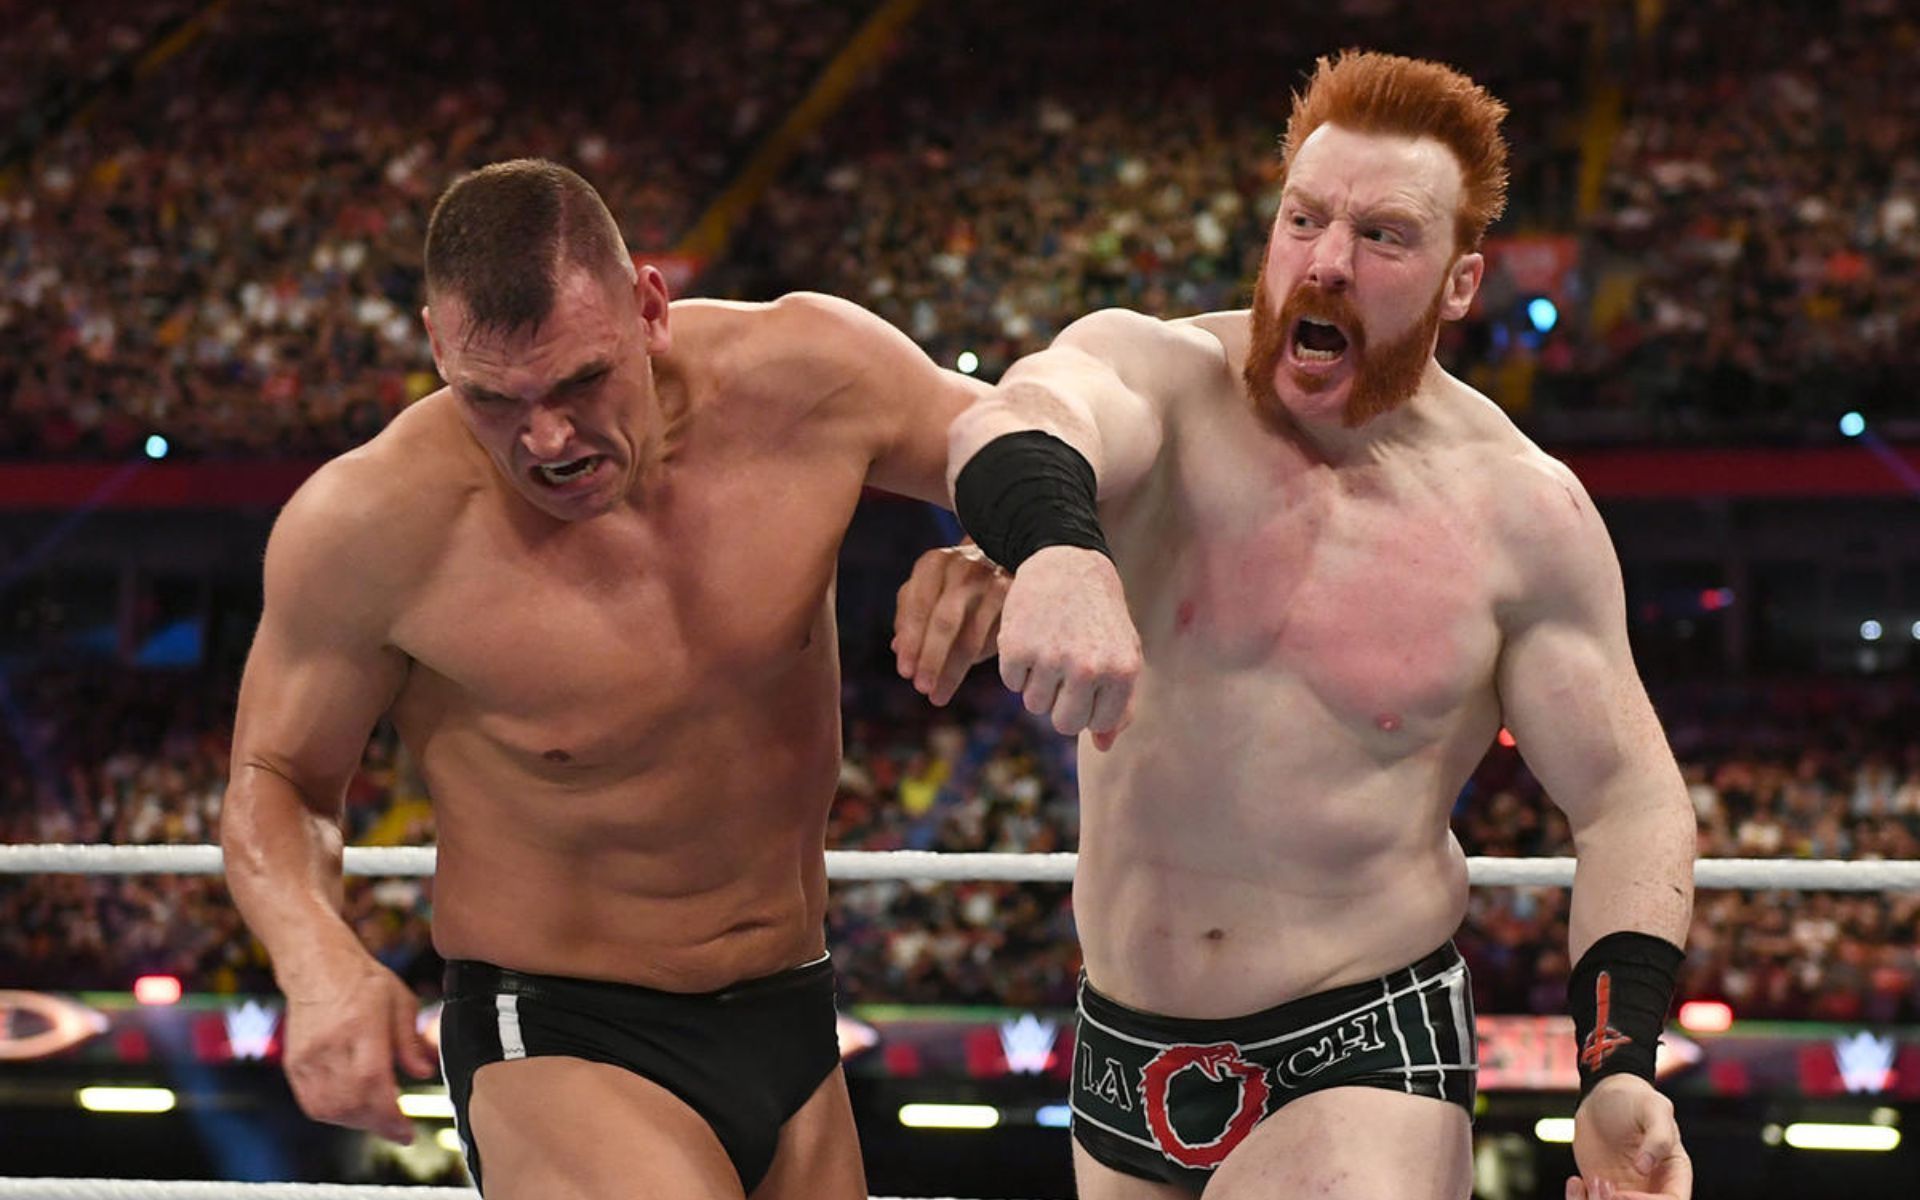 Gunther and Sheamus faced each other at WWE Clash at The Castle!